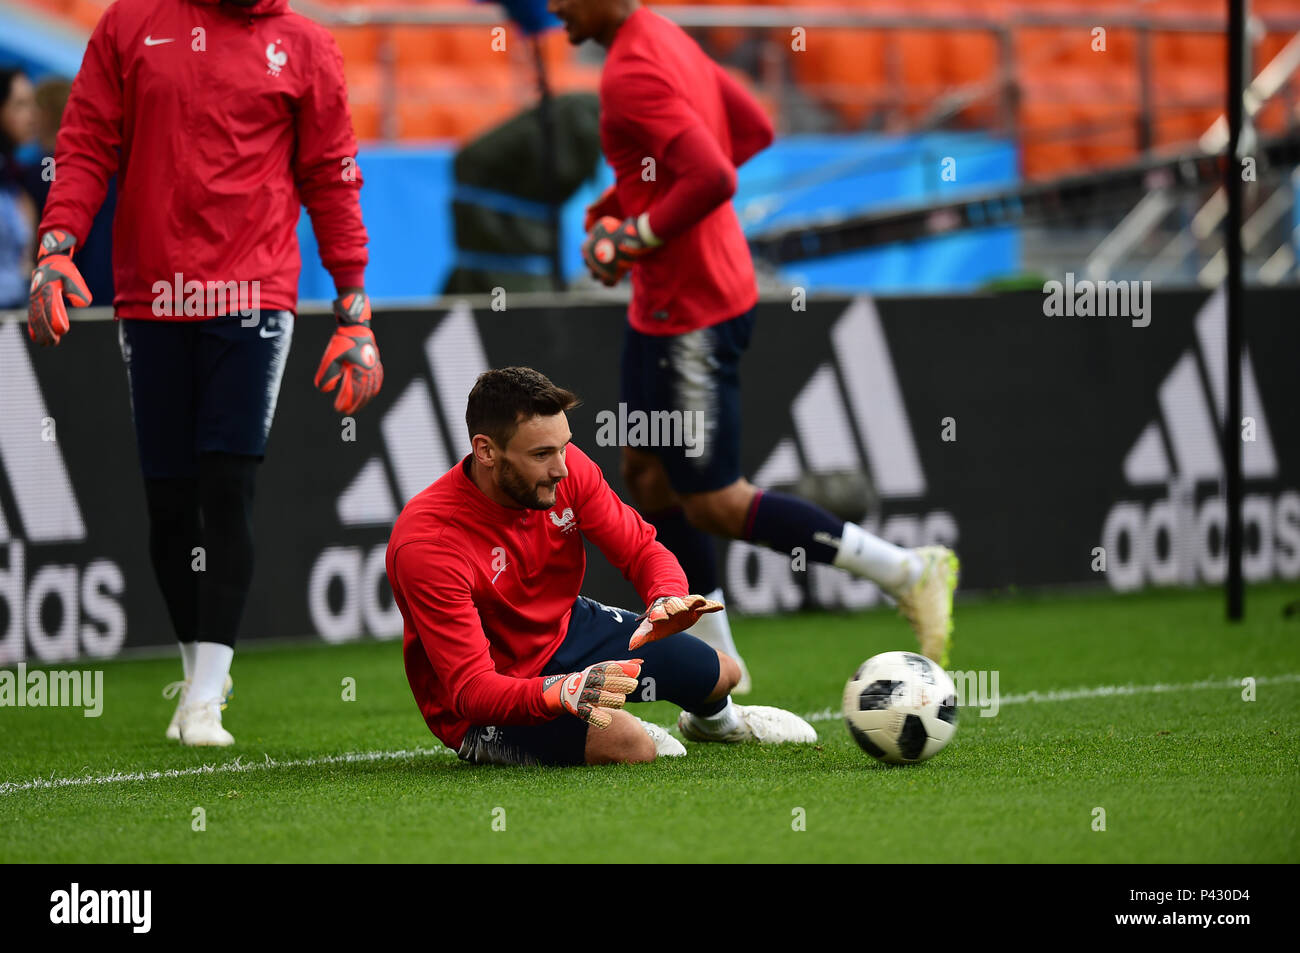 Yekaterinburg, Russia. 20th June, 2018. Goalkeeper Hugo Lloris of France attends a training session during the 2018 FIFA World Cup in Yekaterinburg, Russia, on June 20, 2018. Credit: Du Yu/Xinhua/Alamy Live News Stock Photo